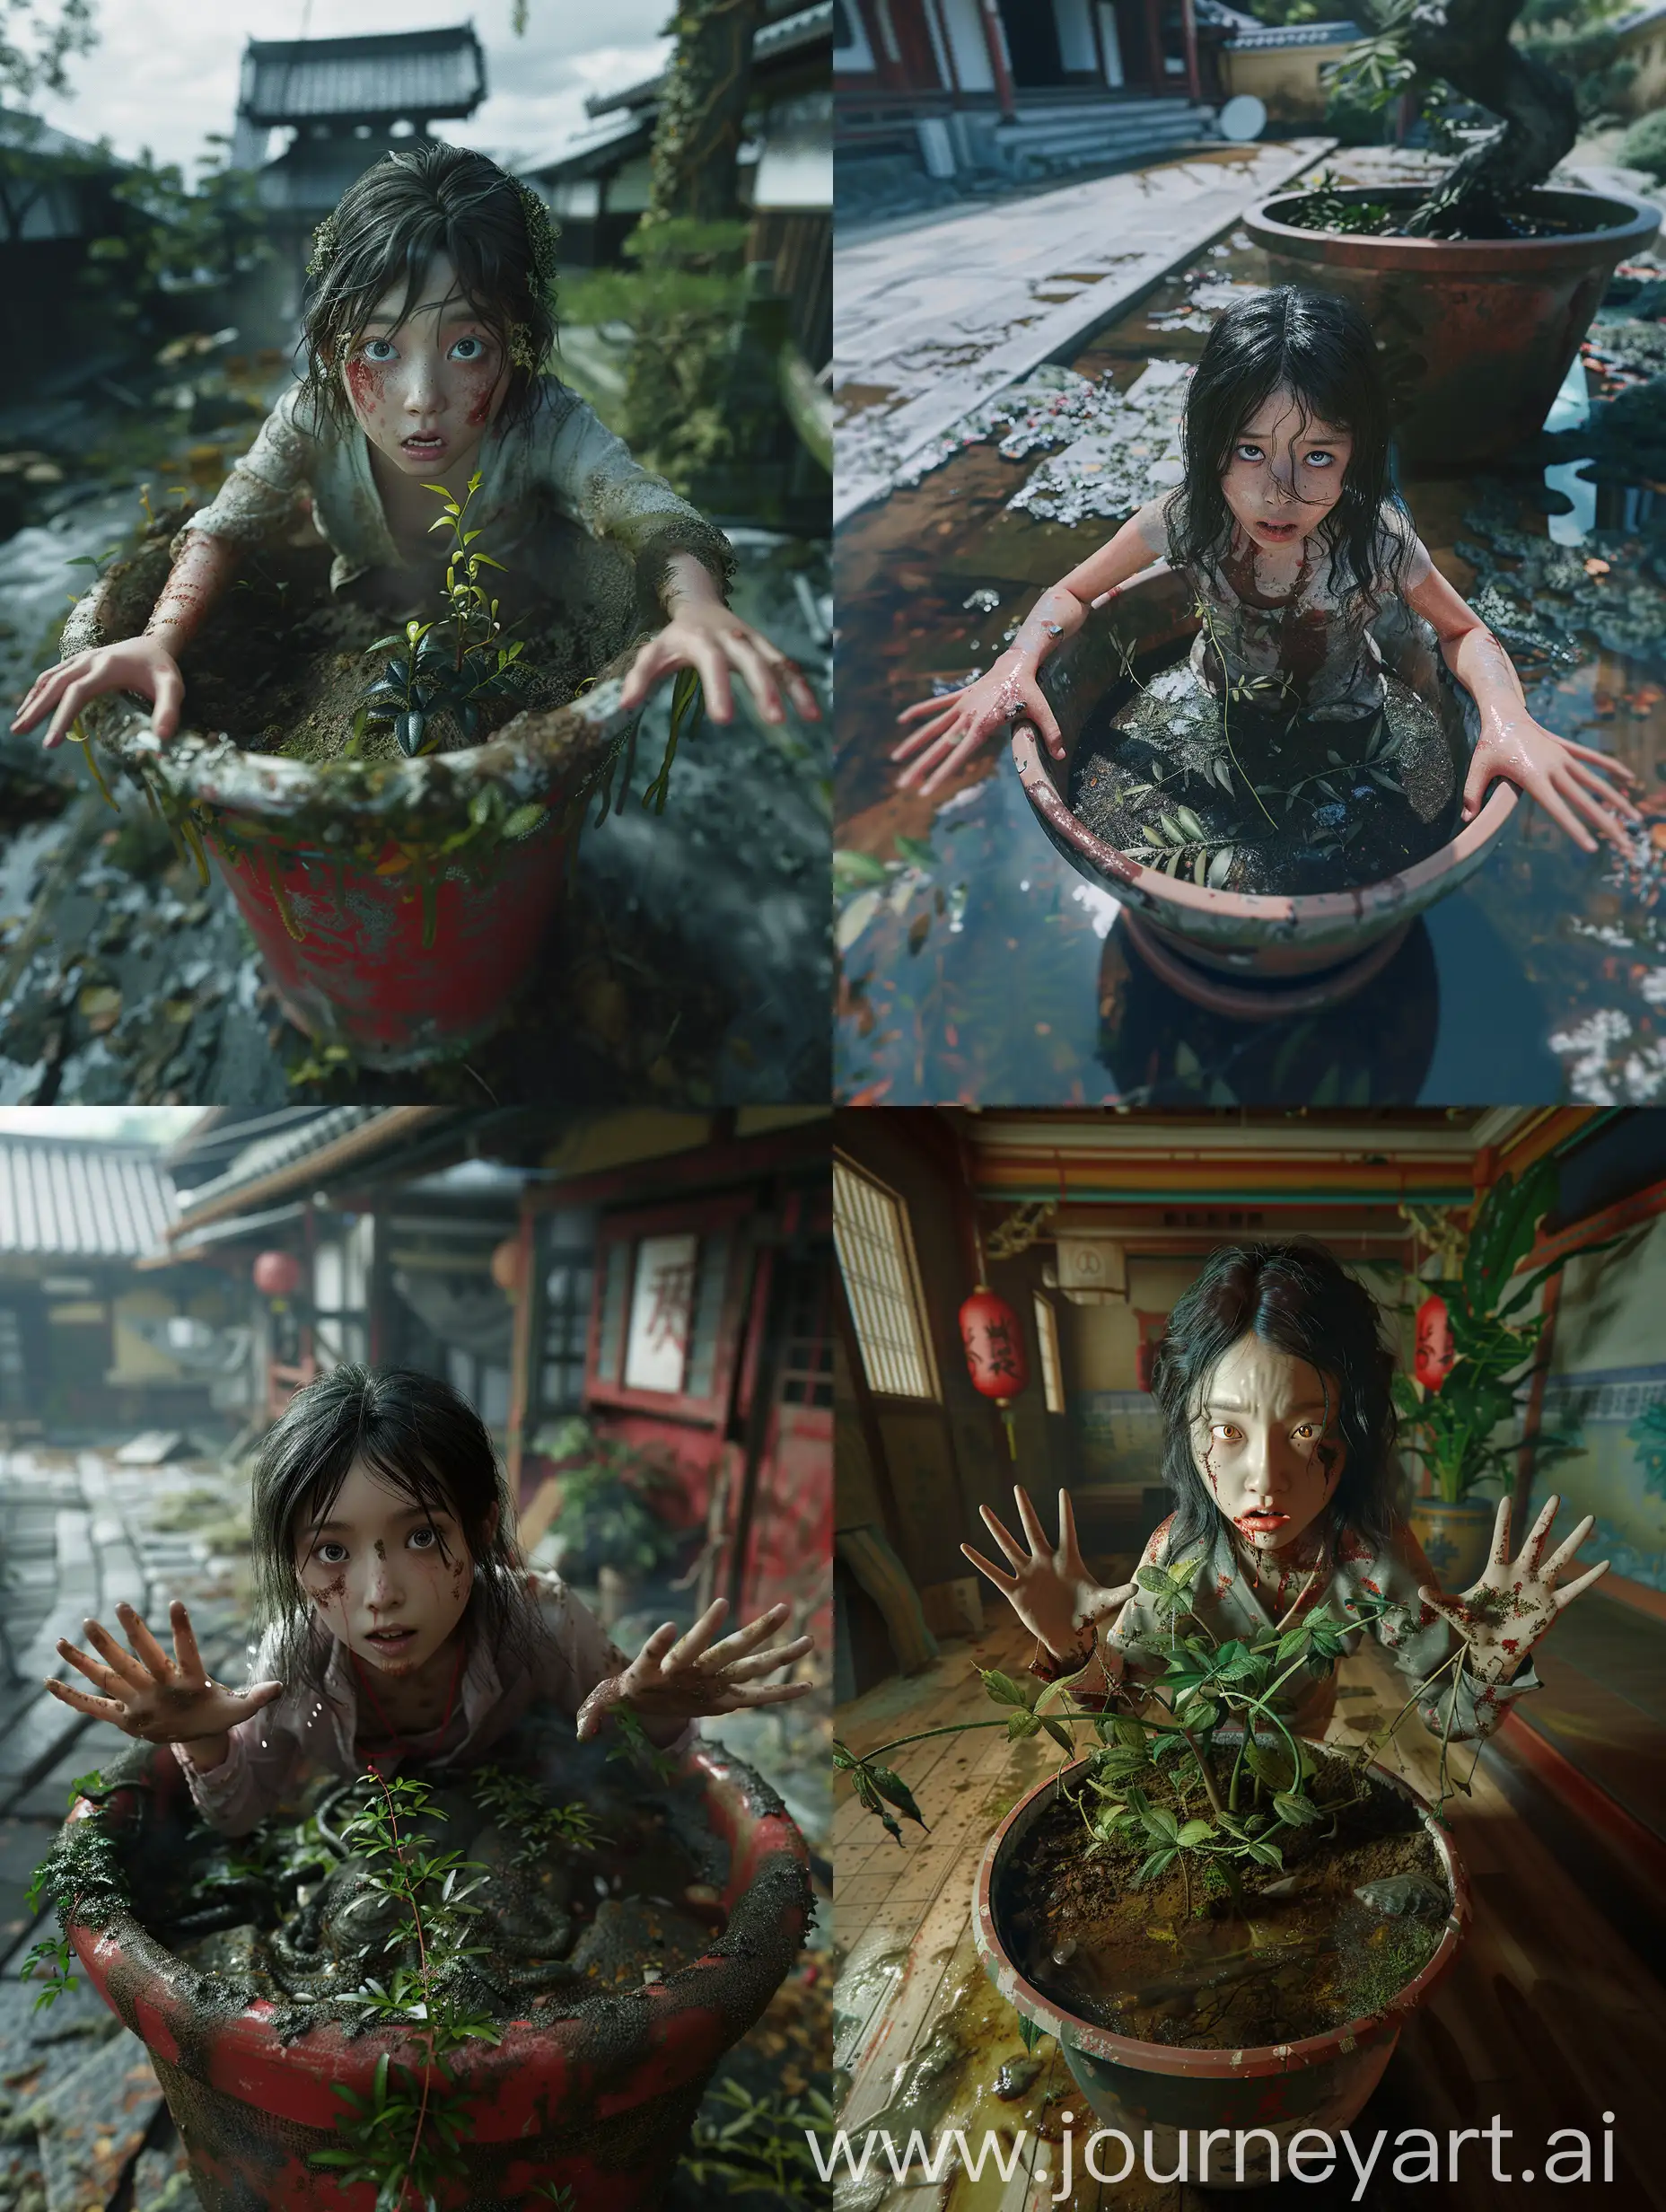 Photorealistic-Fantasy-Young-Girl-Growing-from-a-Potted-Plant-in-an-Abandoned-Japanese-Temple